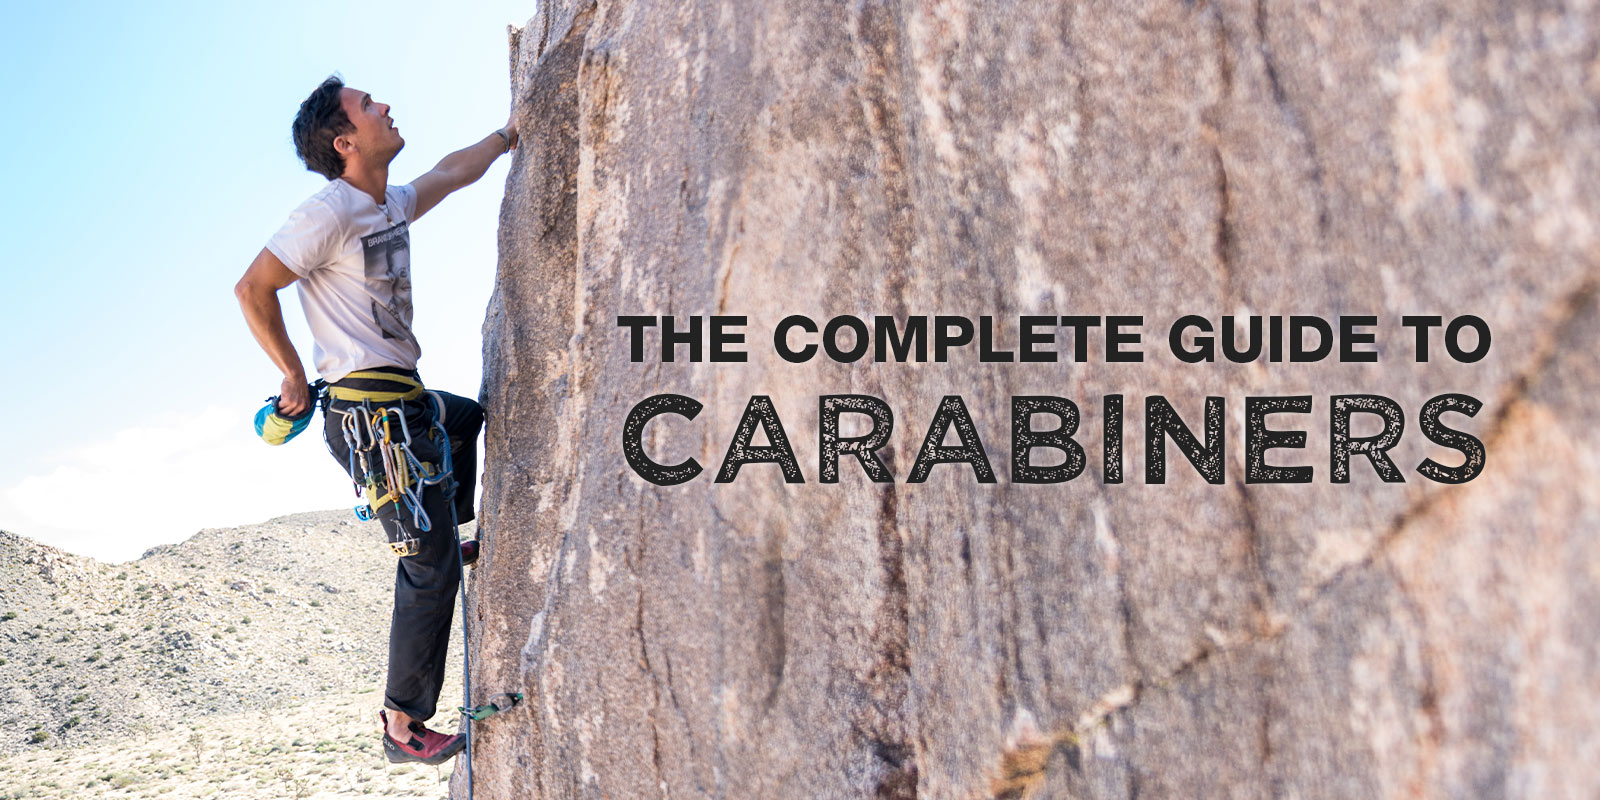 The Complete Guide to Carabiners